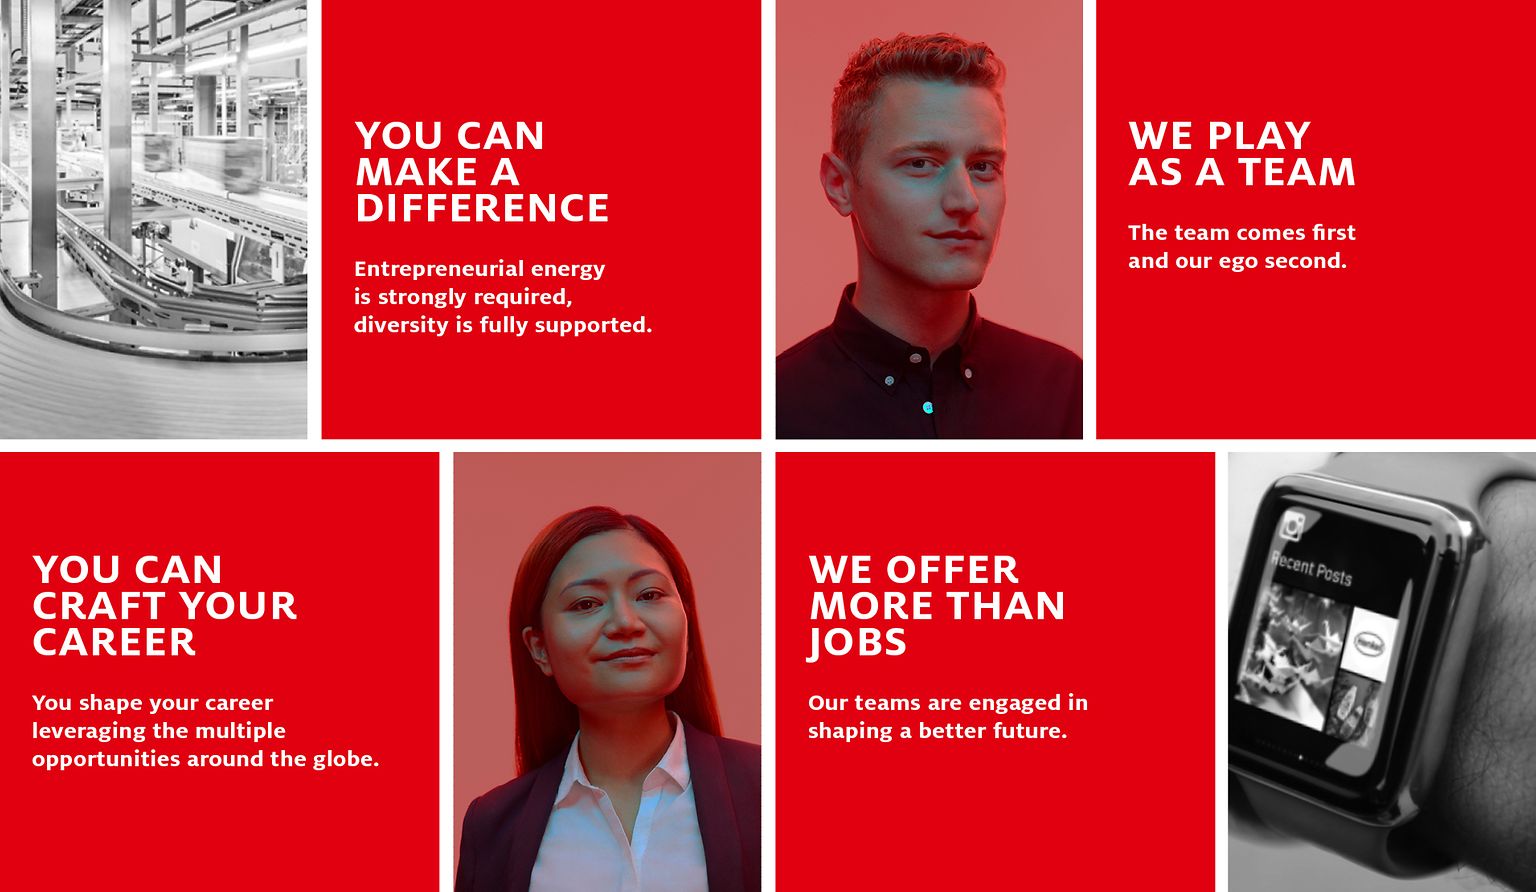 The campaign focuses on Henkel’s value as an employer.